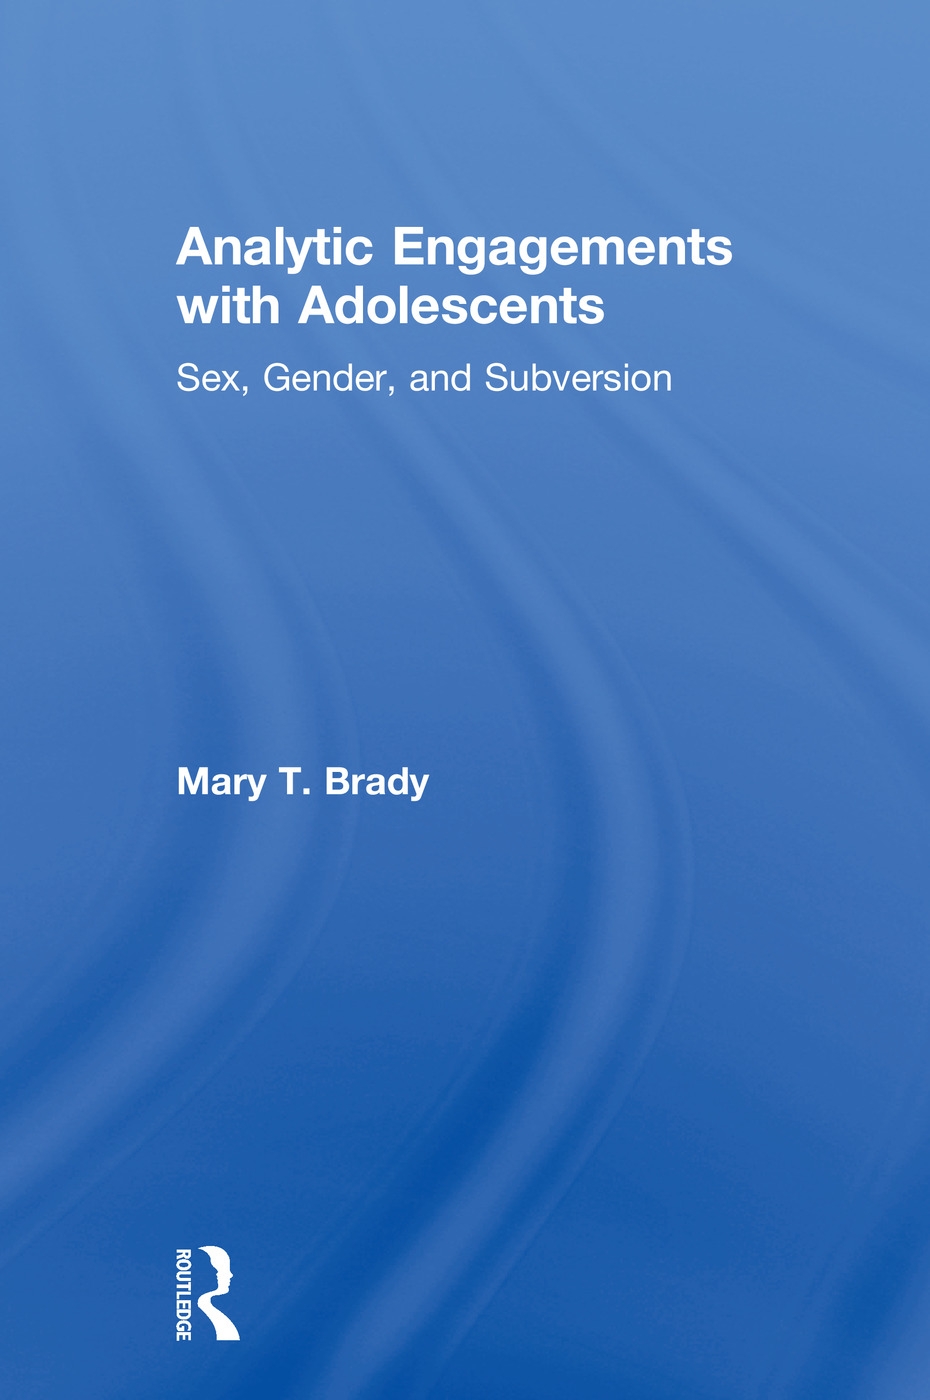 Analytic Engagements with Adolescents: Sex, Gender, and Subversion